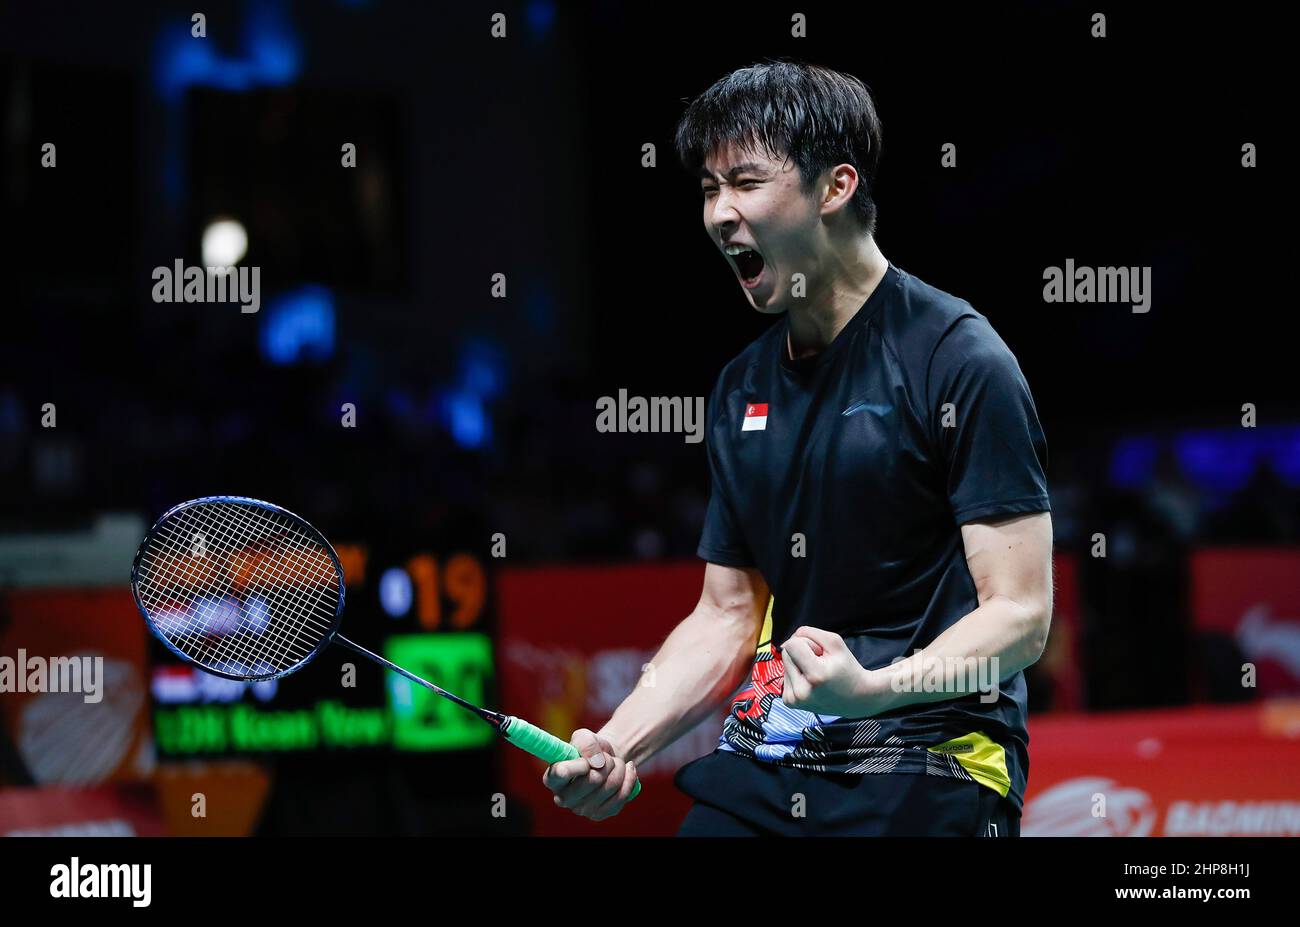 Loh Kean Yew of Singapore celebrates after winning the match against Dwi Wardoyo Chico Aura of Indonesia during the team mens singles match at the Badminton Asia Team Championships 2022 in Shah